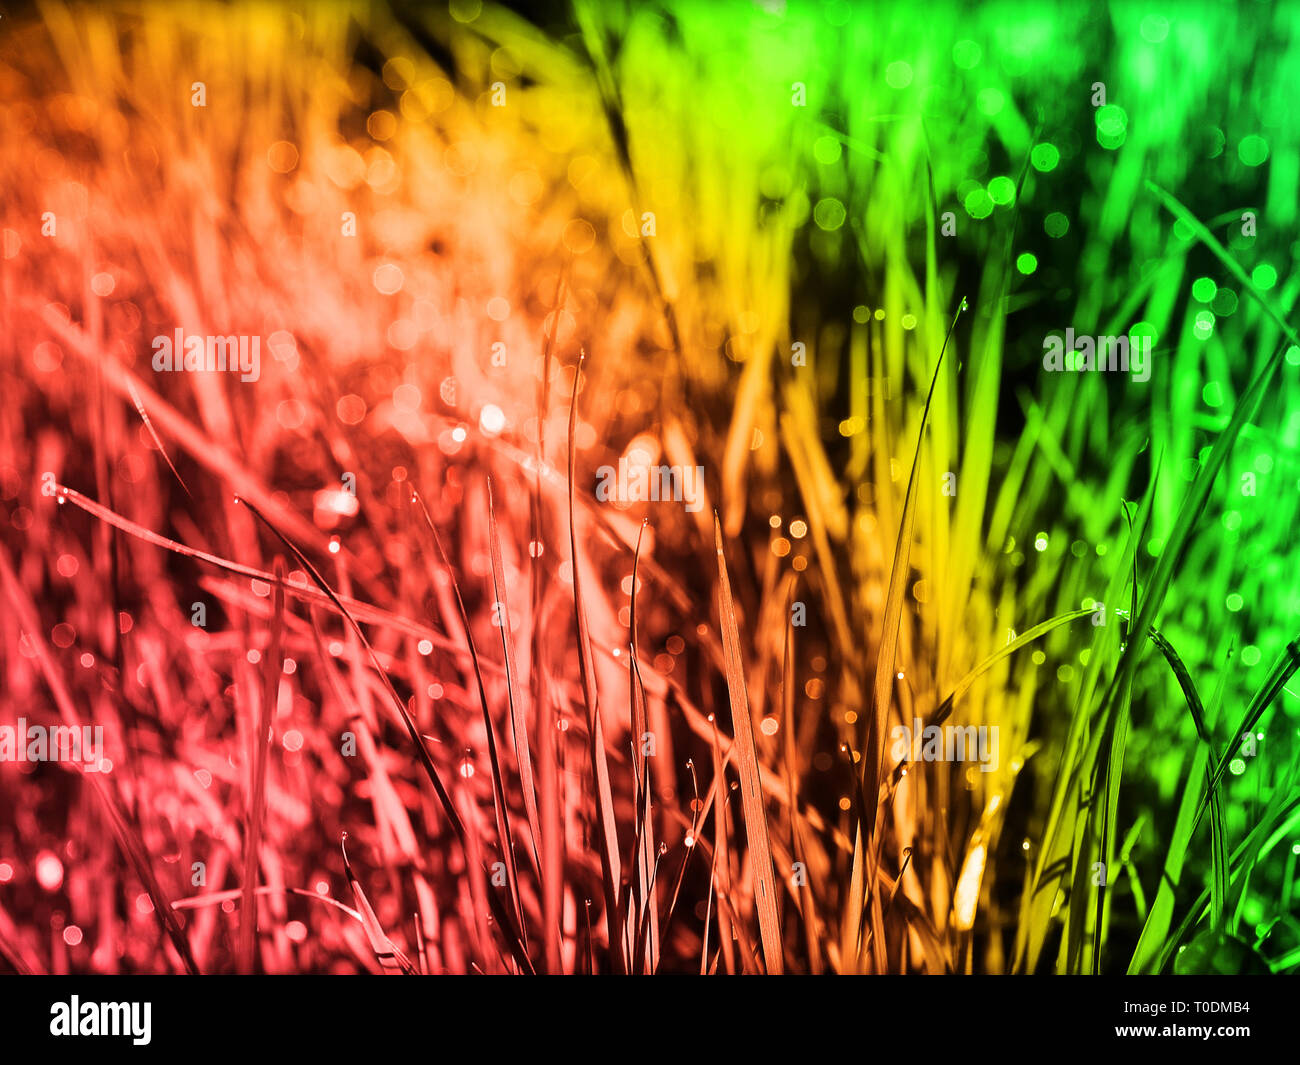 https://c8.alamy.com/comp/T0DMB4/colorful-grass-macro-background-psychedeic-edition-with-water-drops-and-bokeh-effect-fine-art-photography-positive-vibes-you-only-live-once-yolo-T0DMB4.jpg